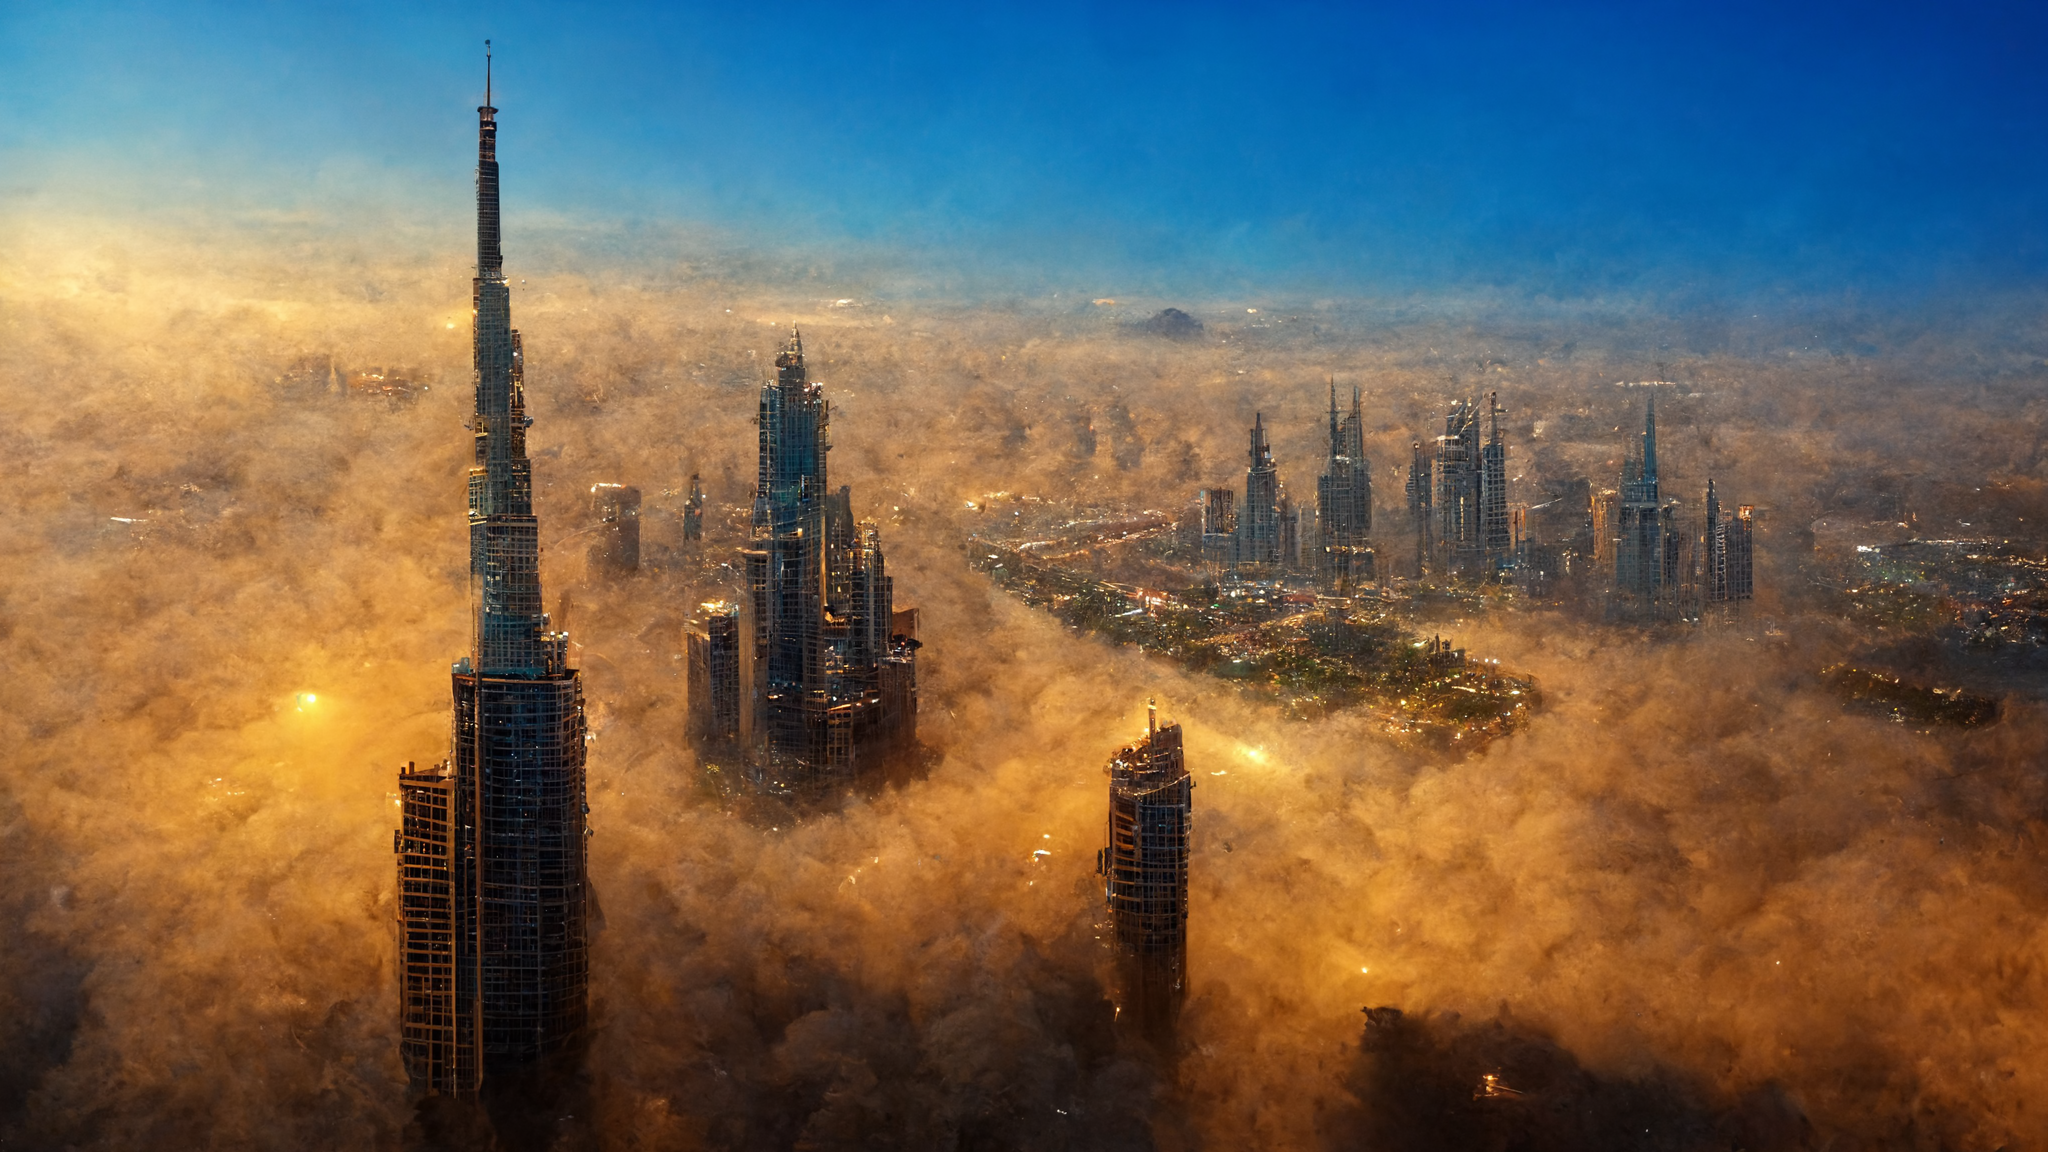 Dubai in the year 2100 after climate change